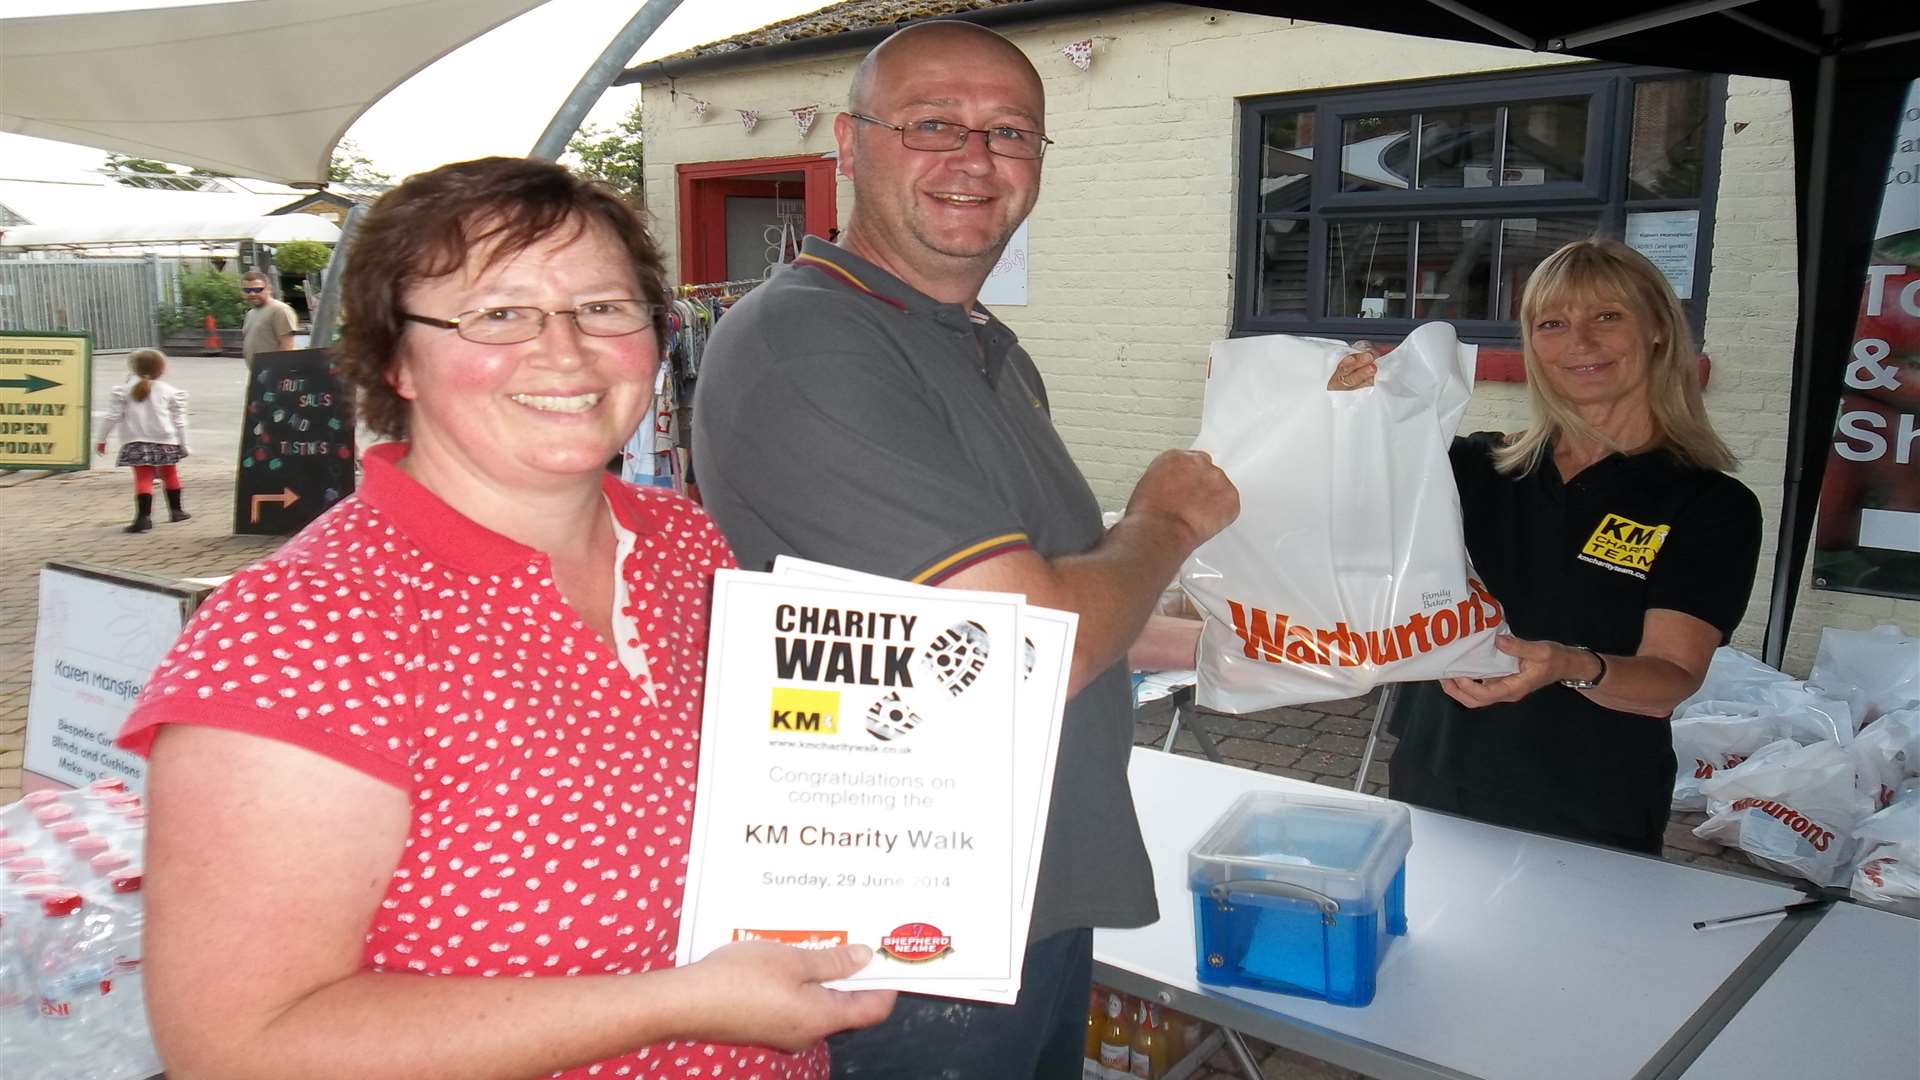 Sarah and Mark Longstaff of Maidstone receive their certificates and Warburtons goody bags from Louise Rogerson of KM Charity Team having successfully completed the KM Charity Walk 2014